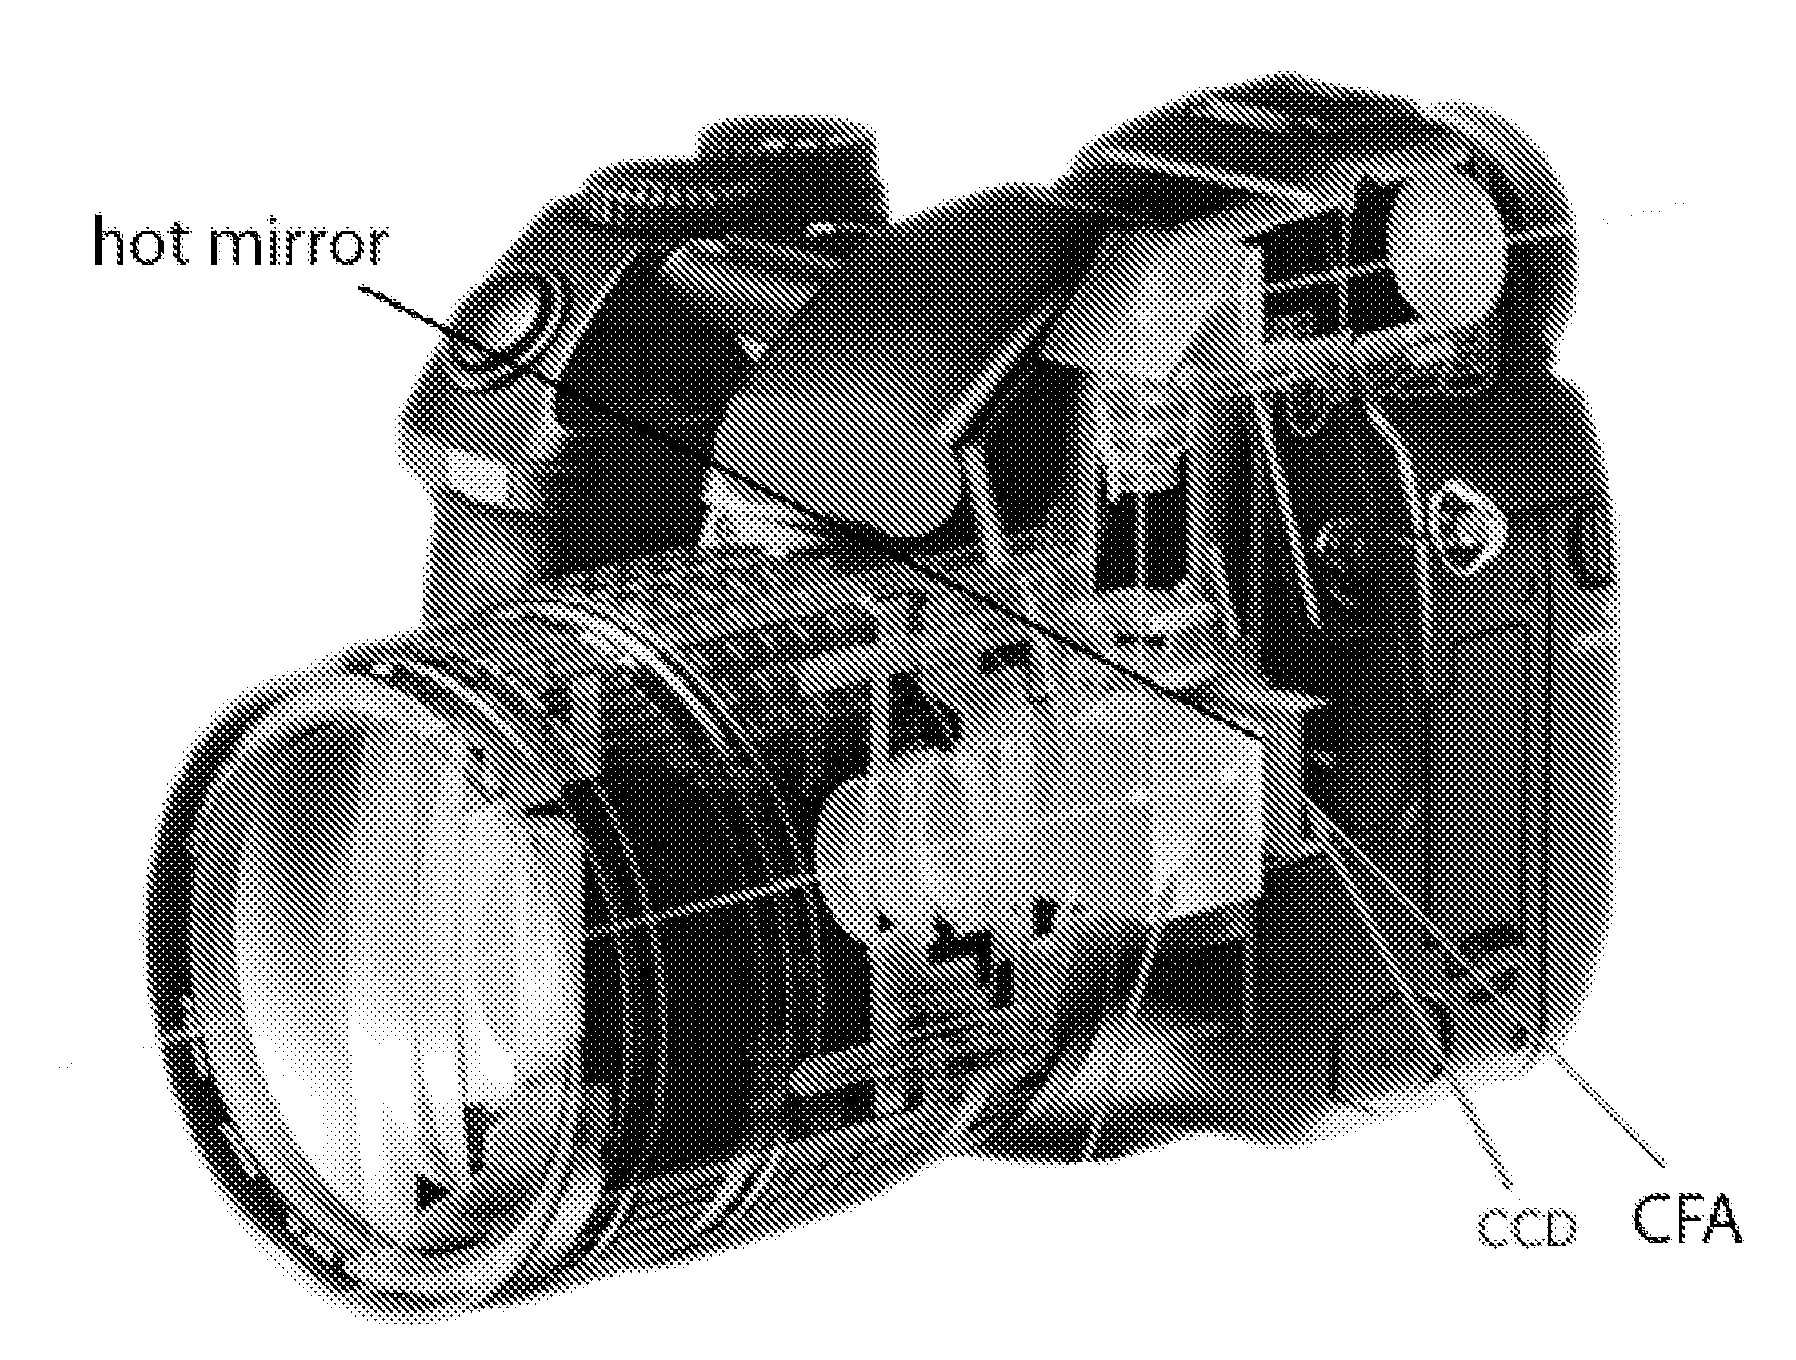 Camera design for the simultaneous capture of near-infrared and visible images